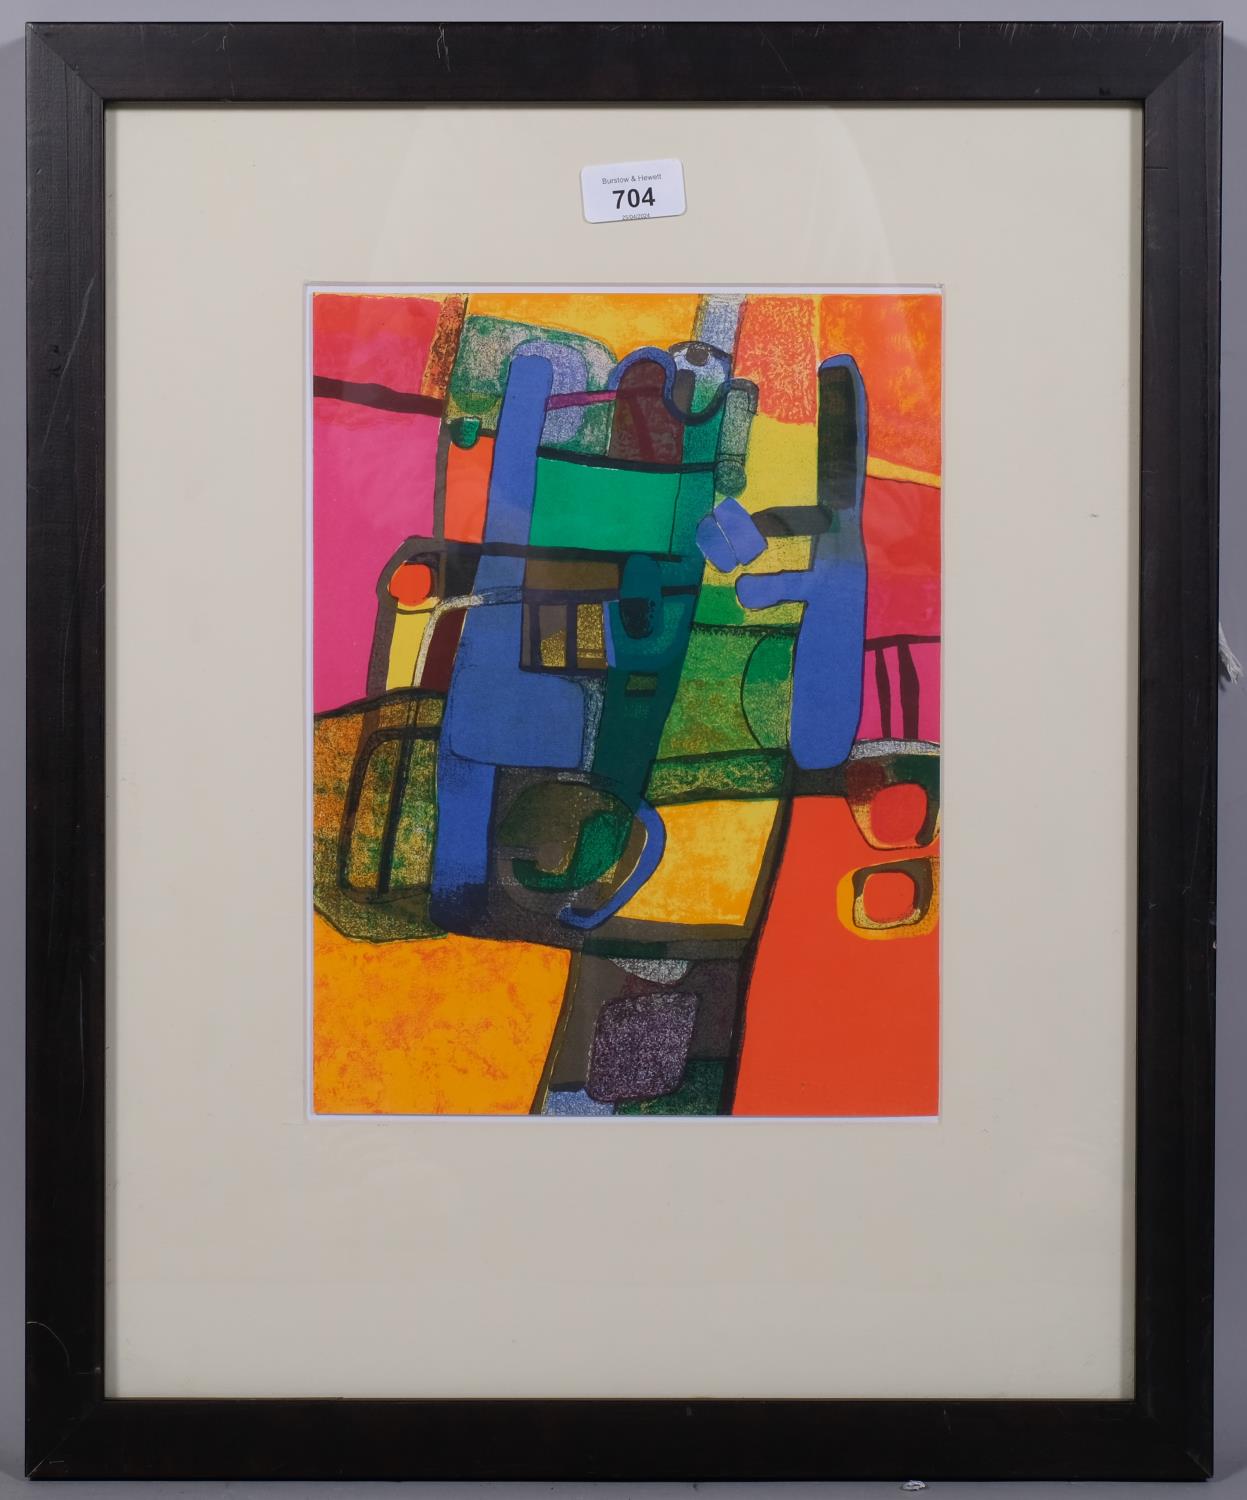 Maurice Esteve (1904 - 2001), abstract composition, original lithograph issued XX Siecle 1968, no. - Image 2 of 4